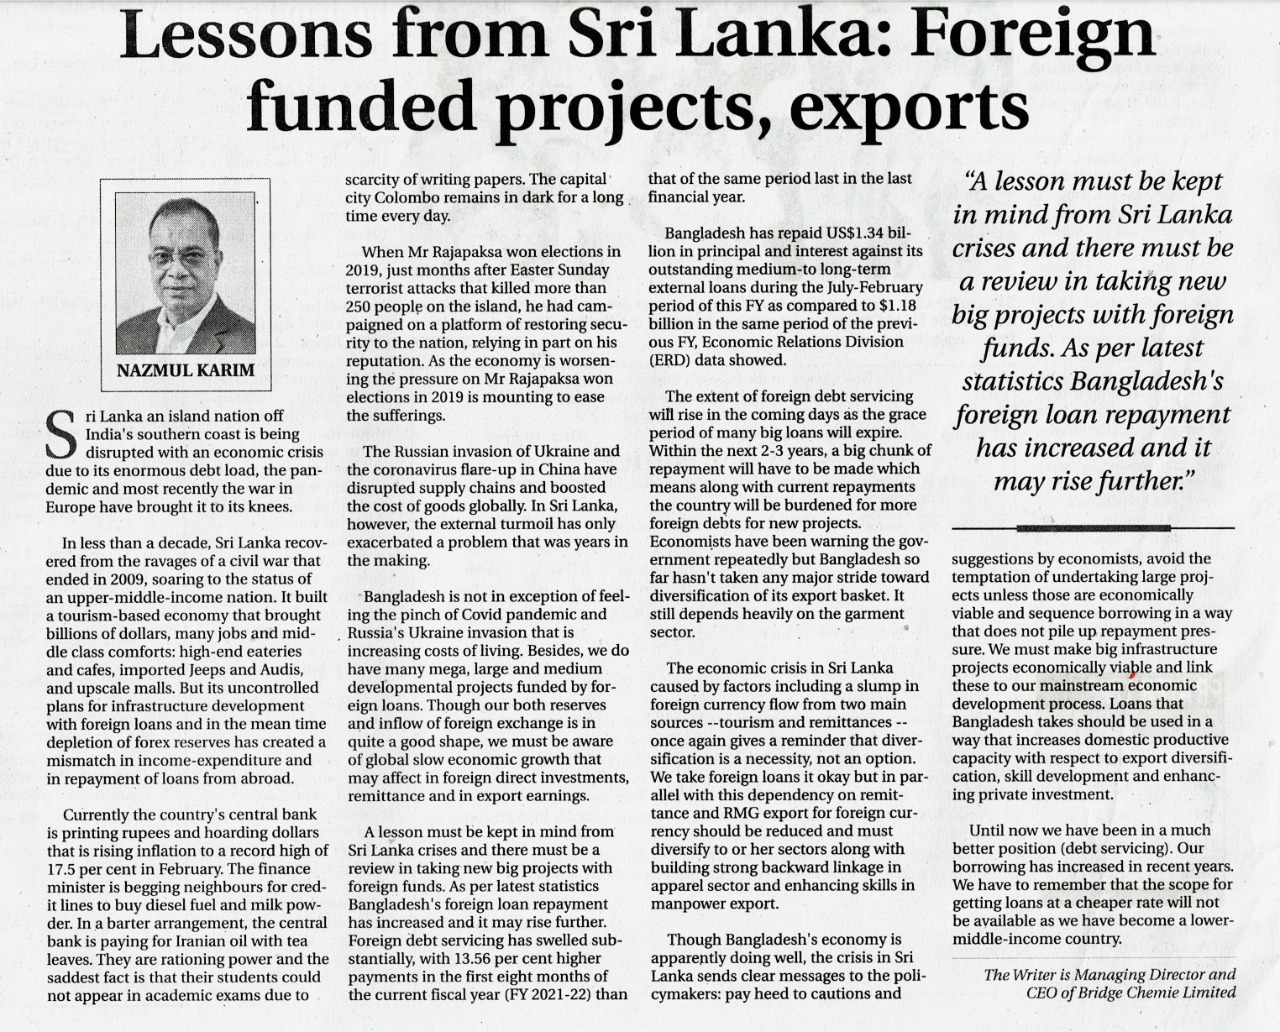 Lessons from Sri Lanka: Foreign-funded projects, exports.